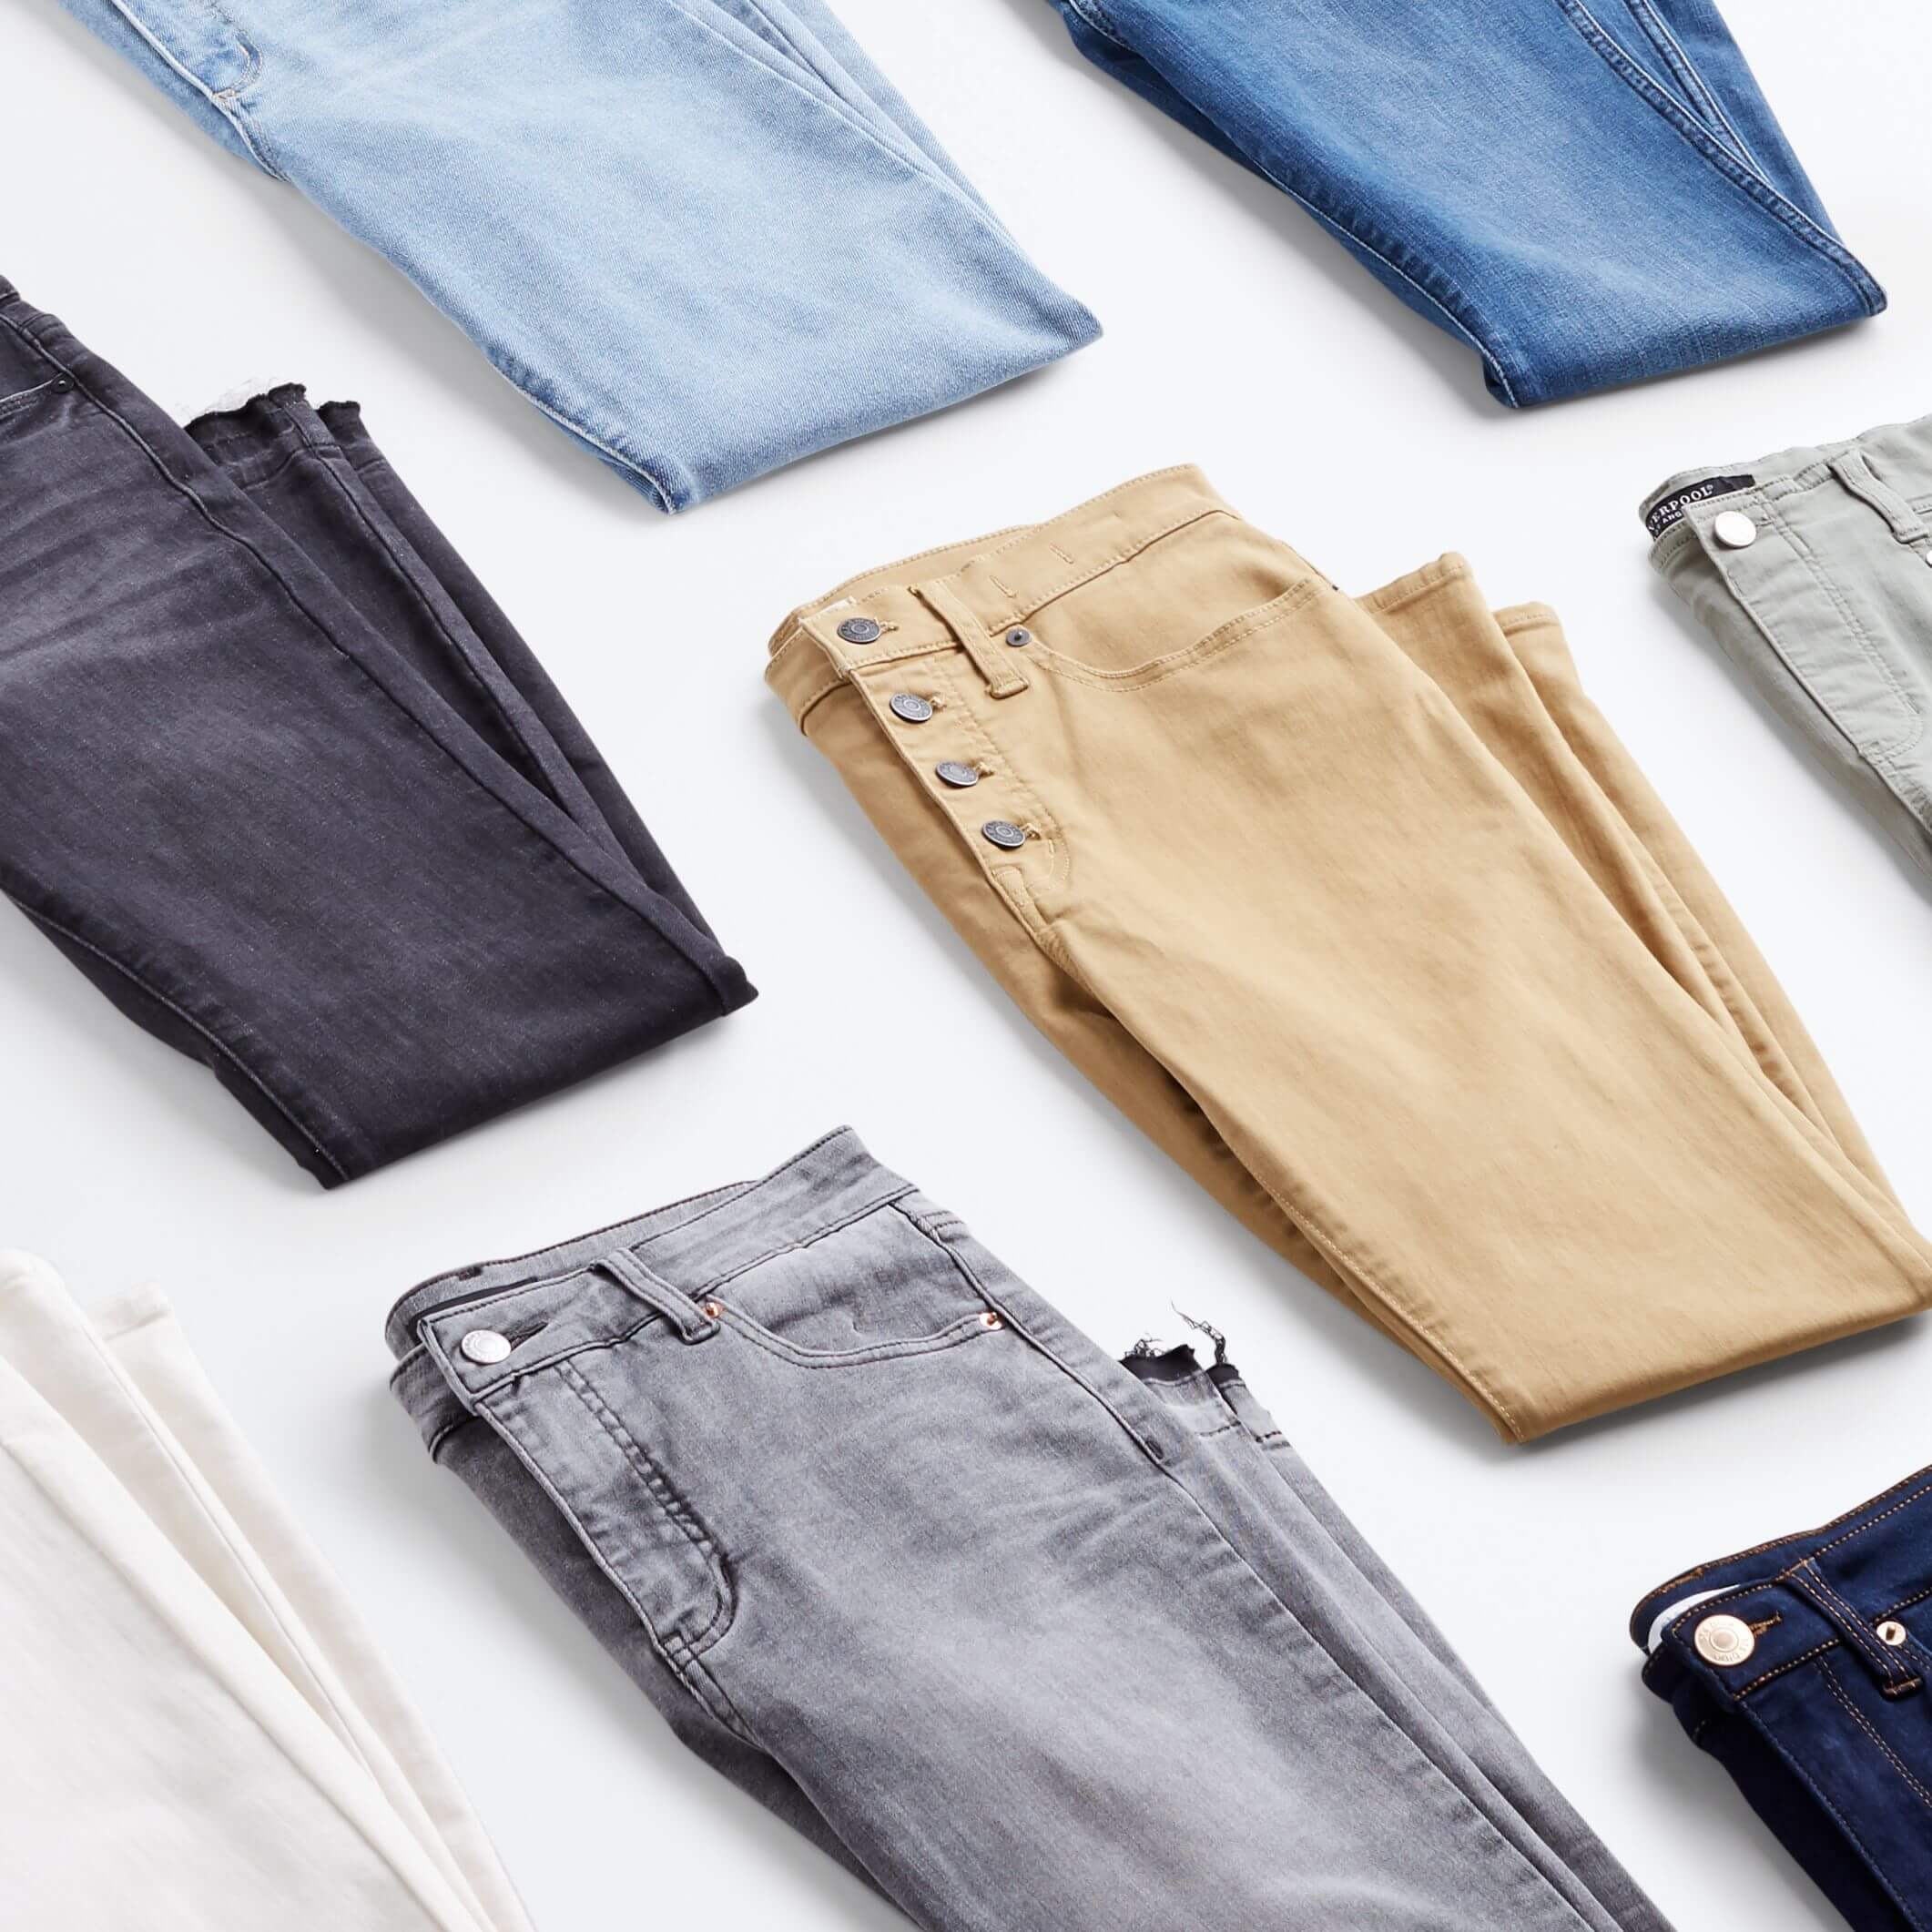 Stitch Fix Women’s jeans in blue, gray, white and khaki folded in half.